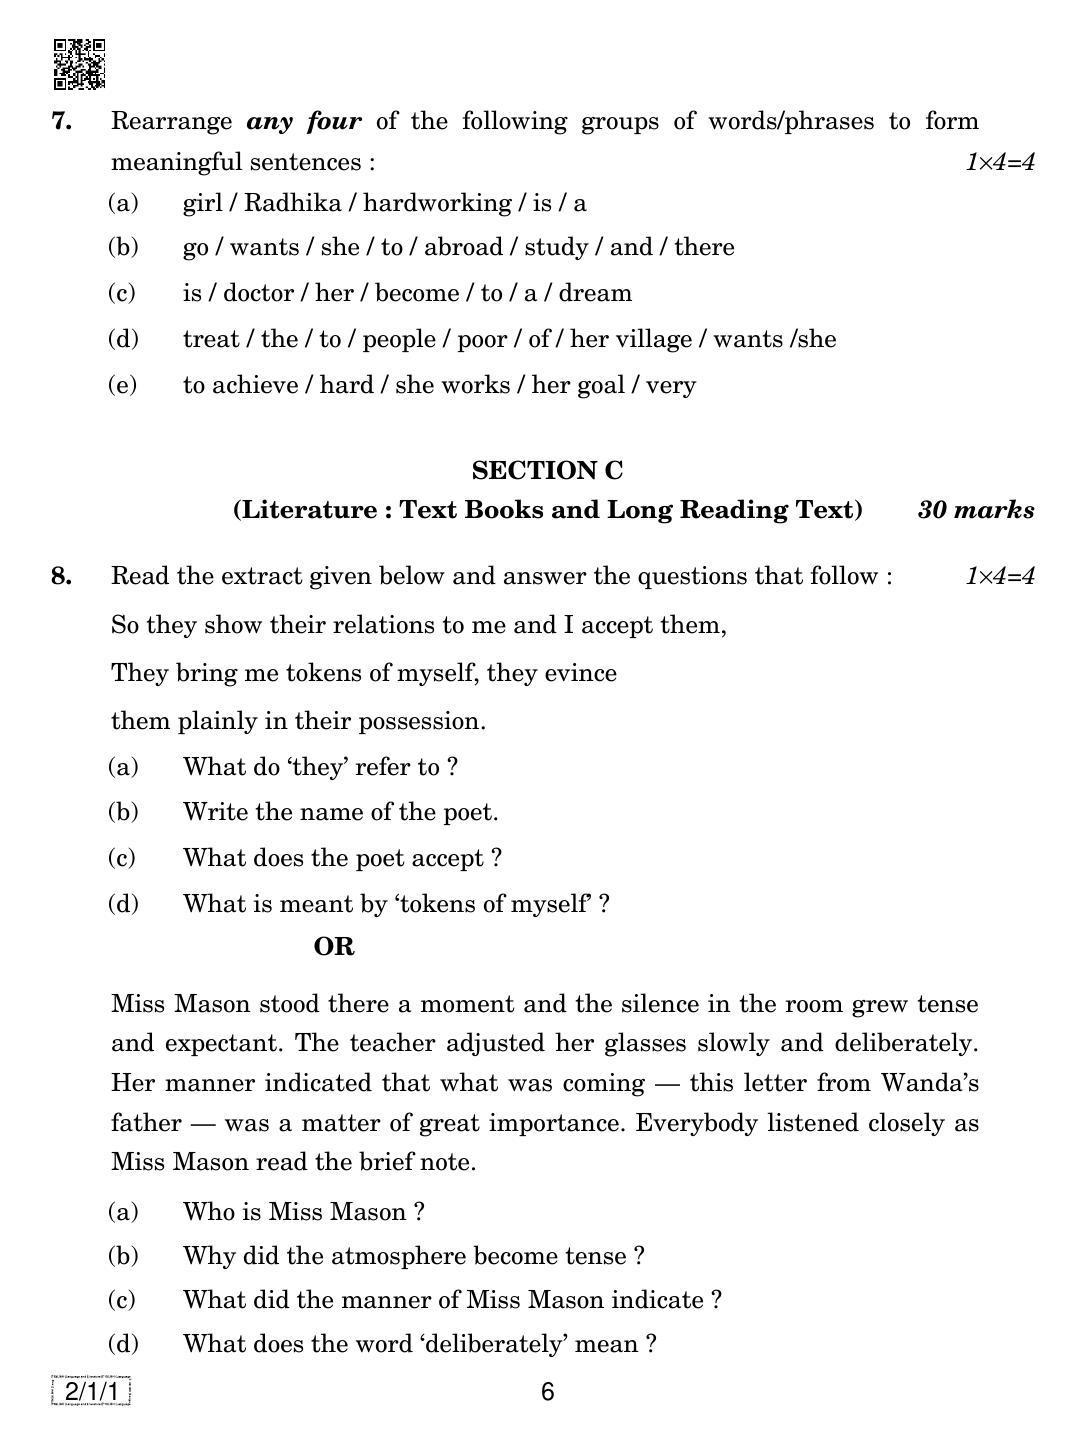 CBSE Class 10 2-1-1 ENGLISH LANG. & LIT. 2019 Compartment Question Paper - Page 6